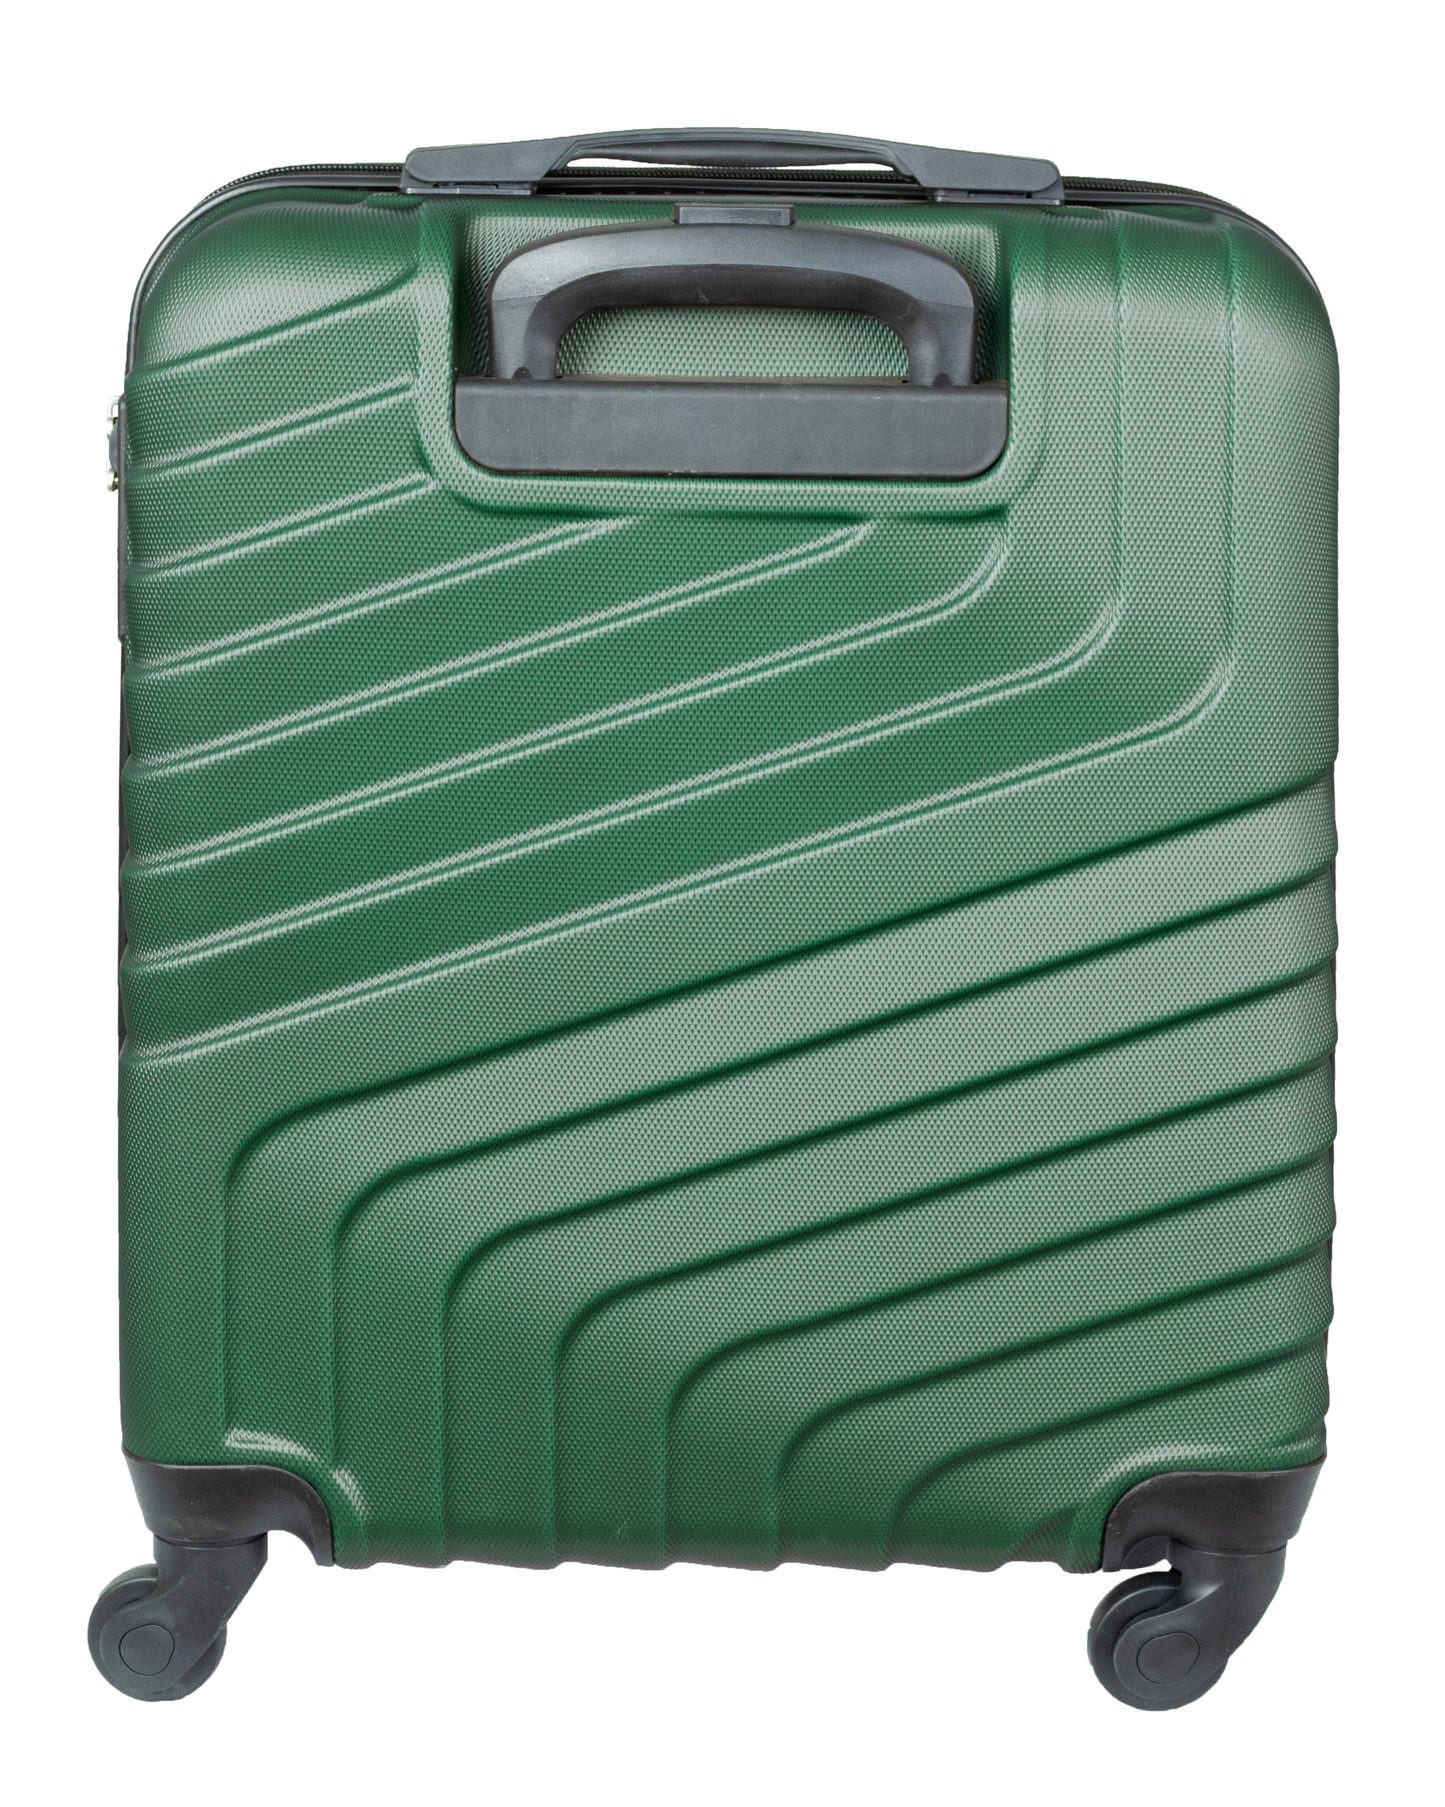 Cabin Size ABS Suitcase Hard Shell Luggage 19"